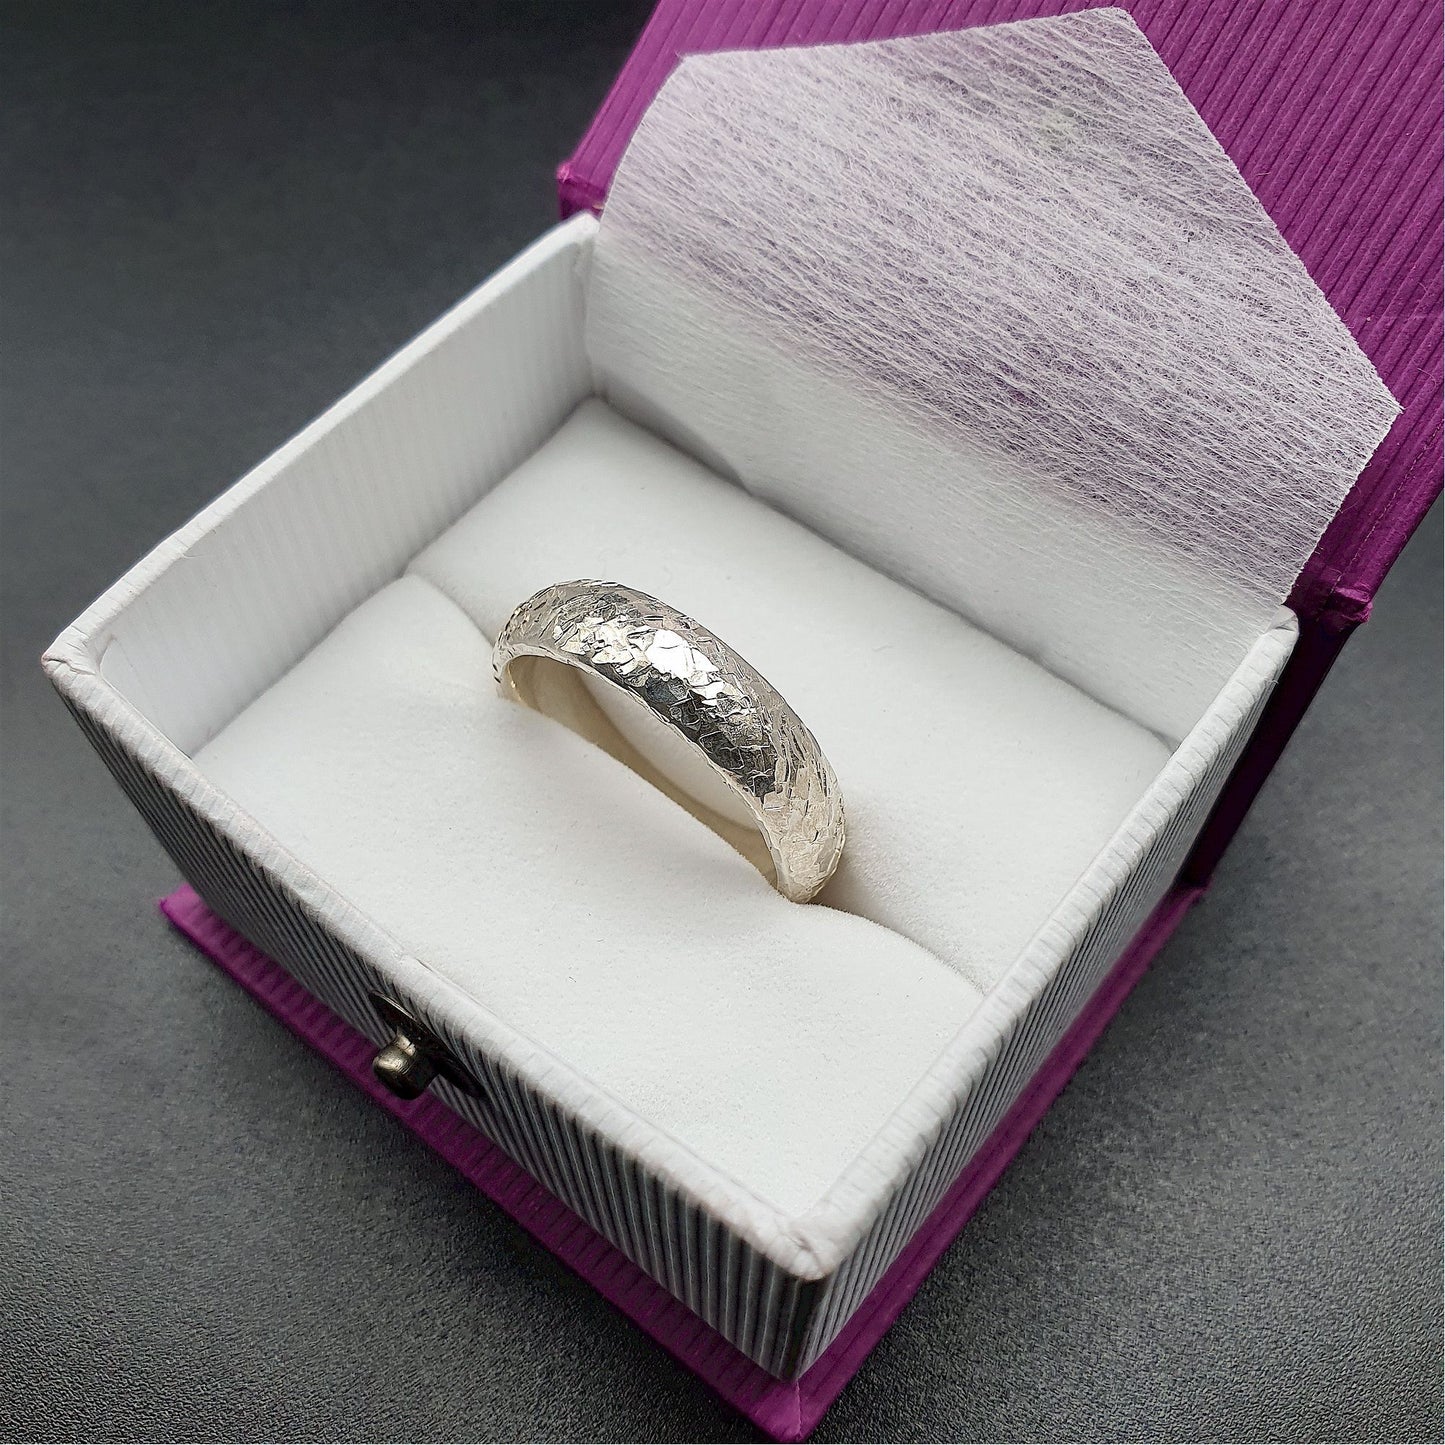 Wedding ring, broad white gold Fire hammered design - Cumbrian Designs